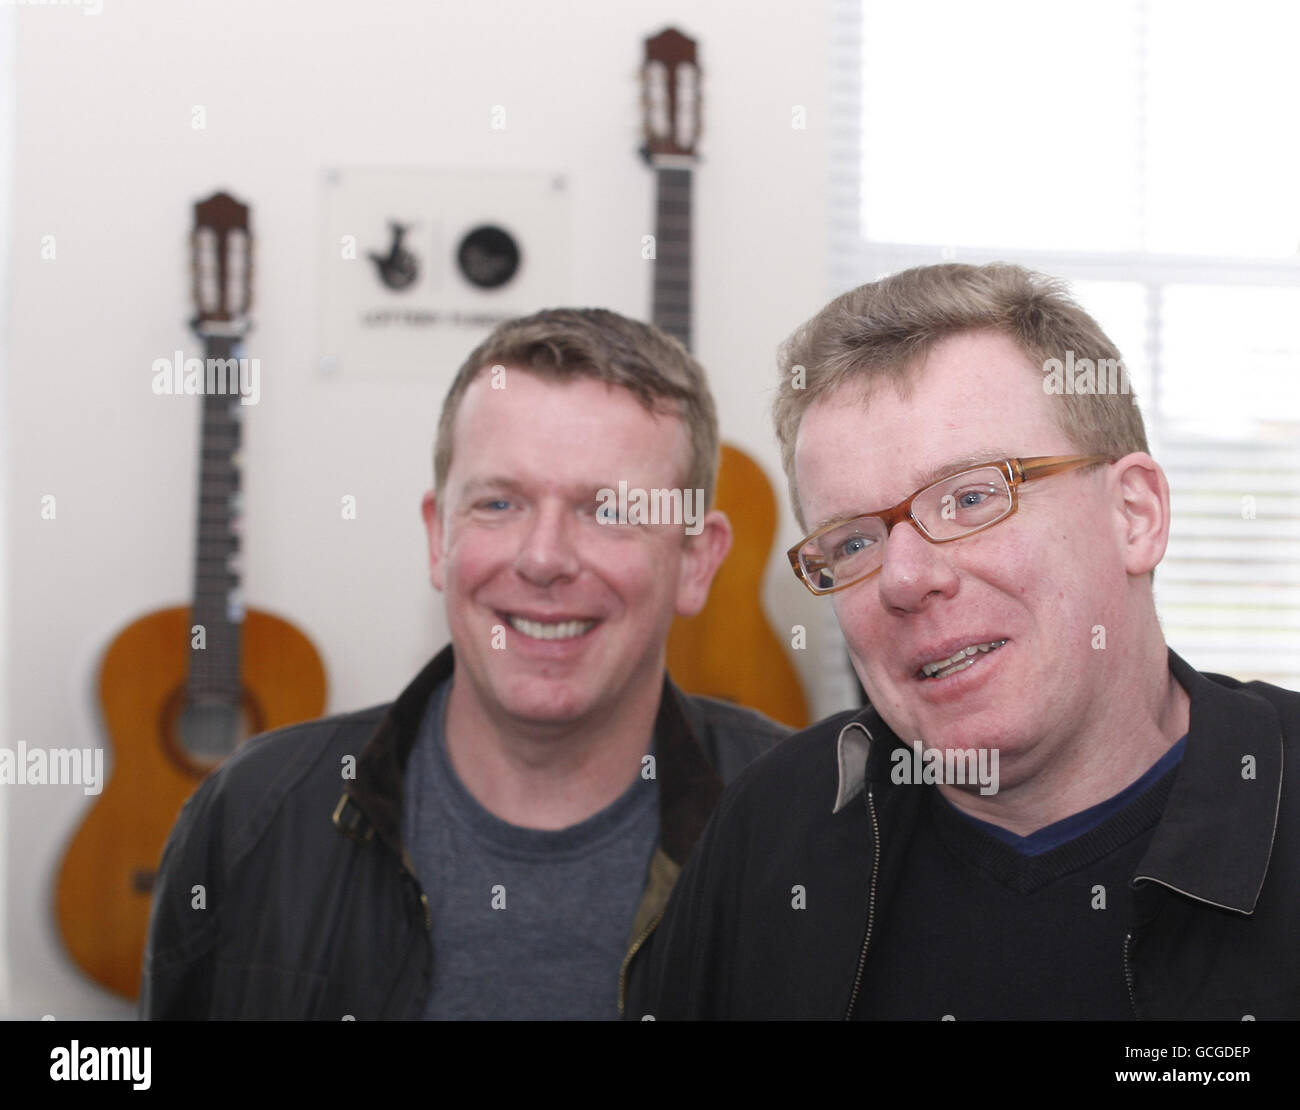 https://c8.alamy.com/comp/GCGDEP/twin-stars-craig-right-and-charlie-from-the-proclaimers-during-the-GCGDEP.jpg